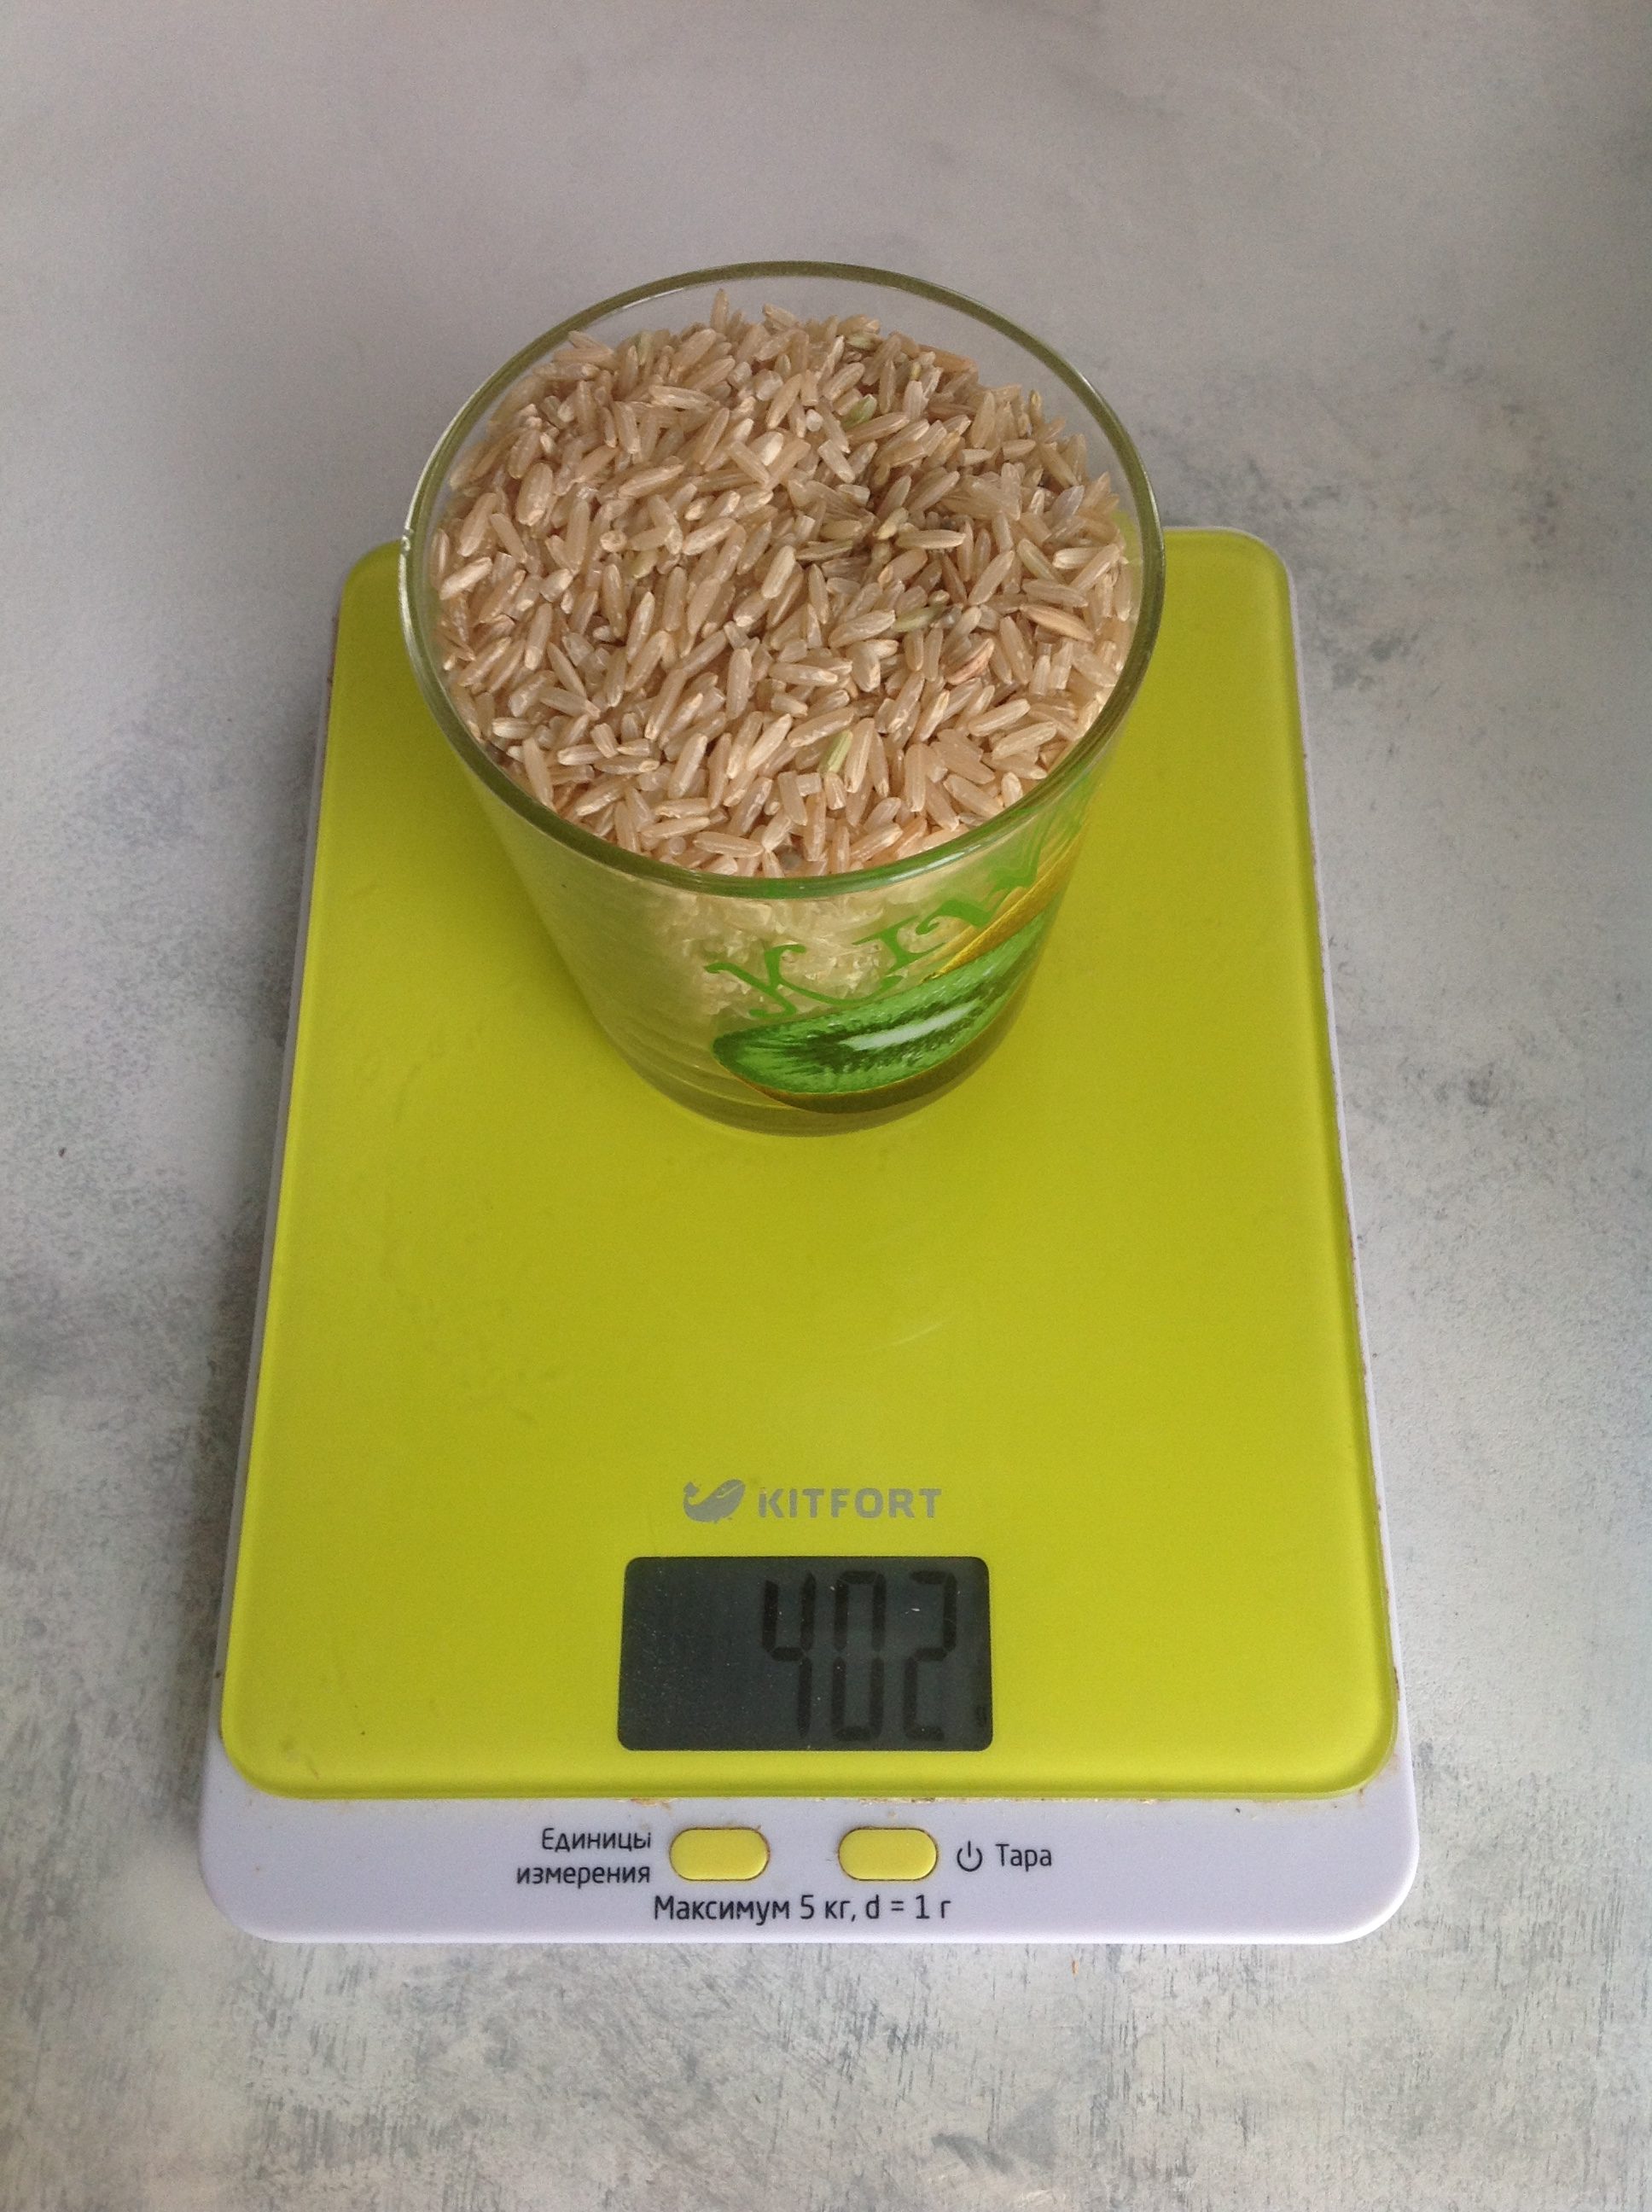 weight of brown dry rice in a 250 ml glass